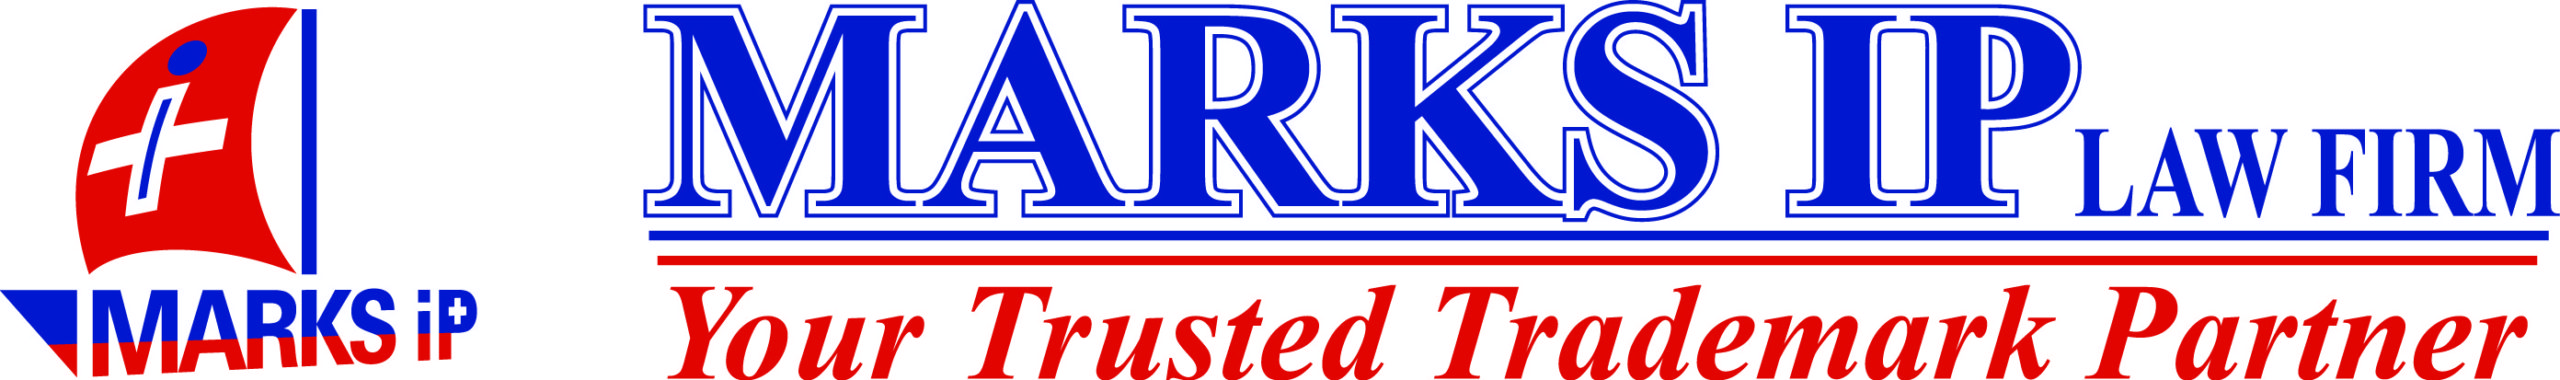 MARKS IP LAW FIRM